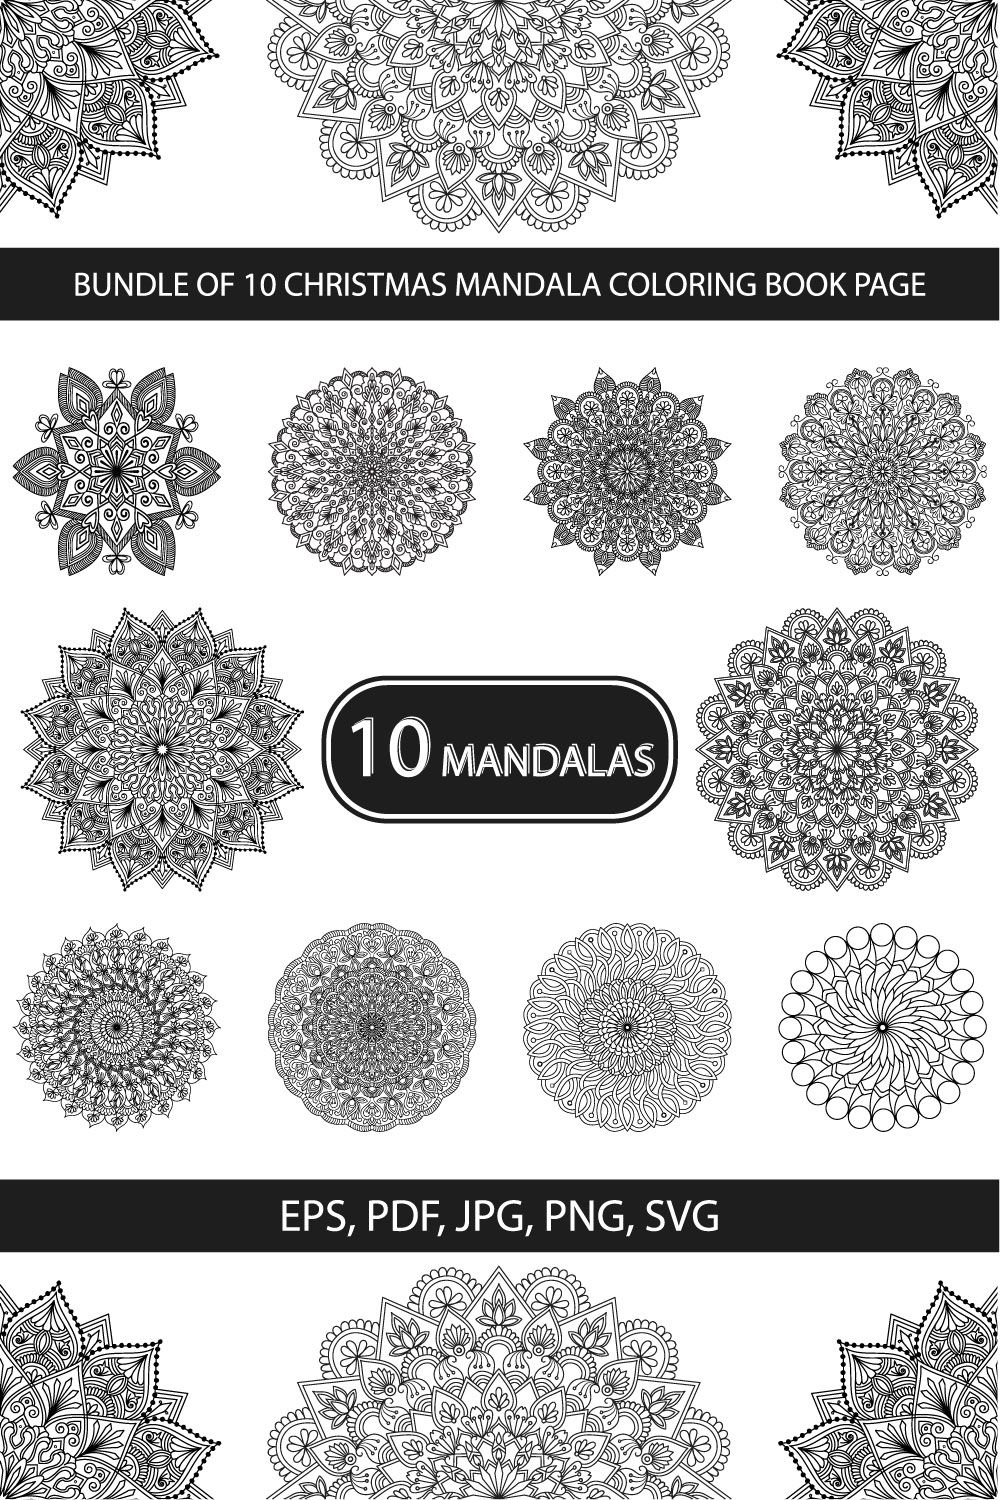 Bundle of 10 Christmas Mandala Coloring Book Pages pinterest preview image.